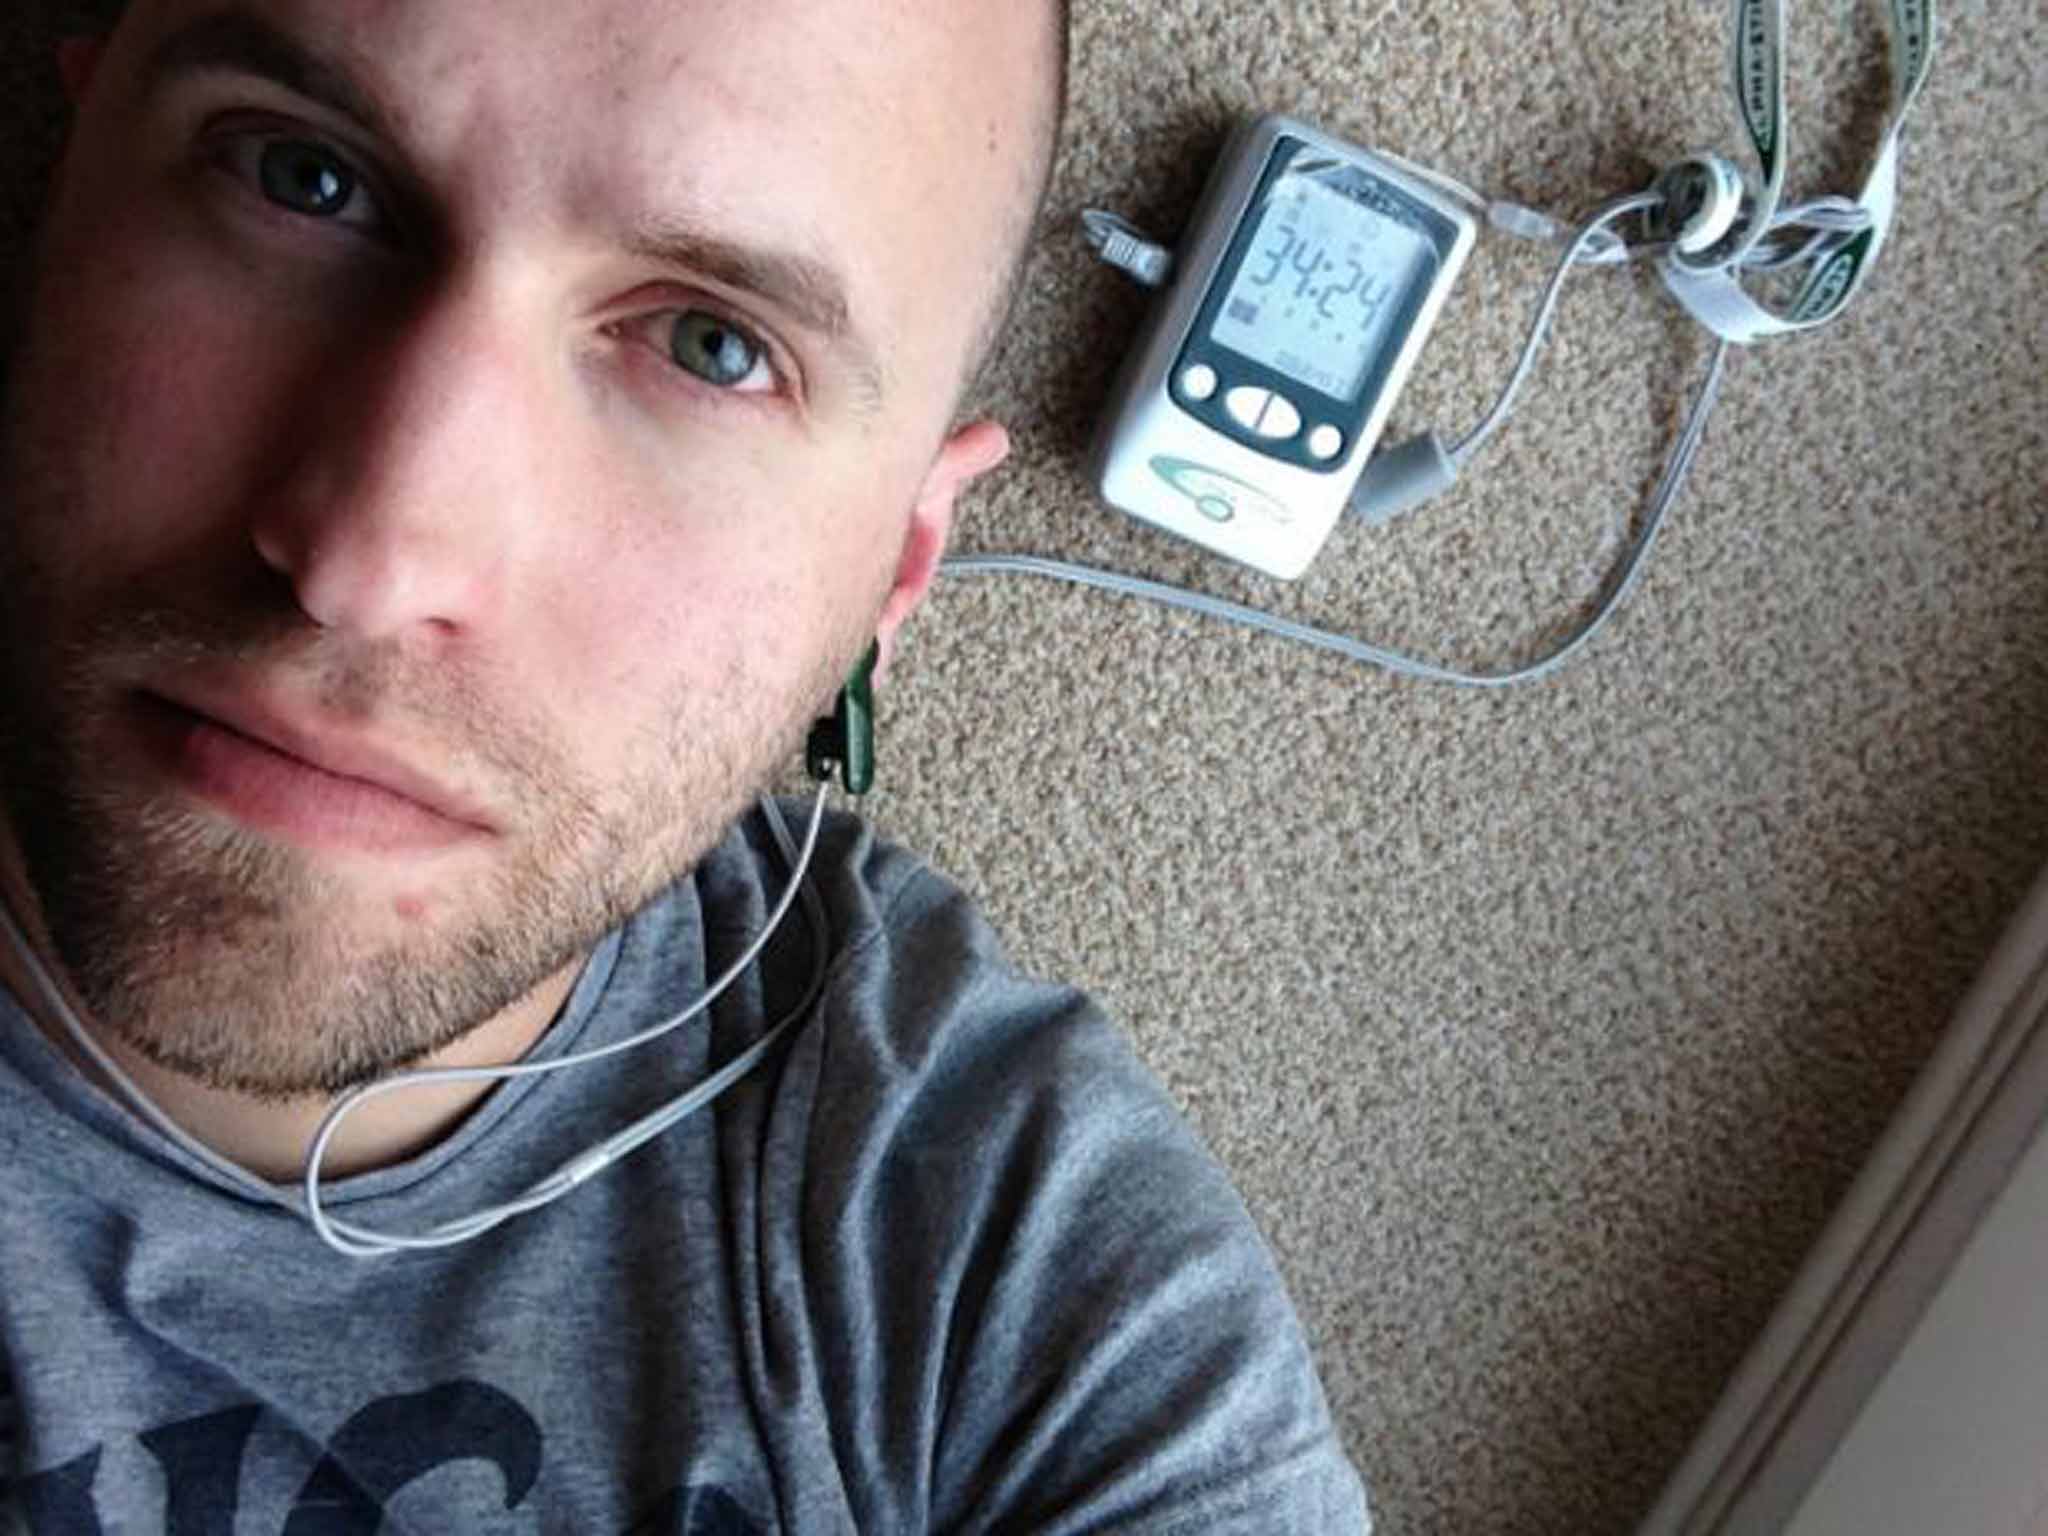 Current thinking: David Bass found Alpha-Stim helped his OCD but his problems with the condition aren't solved